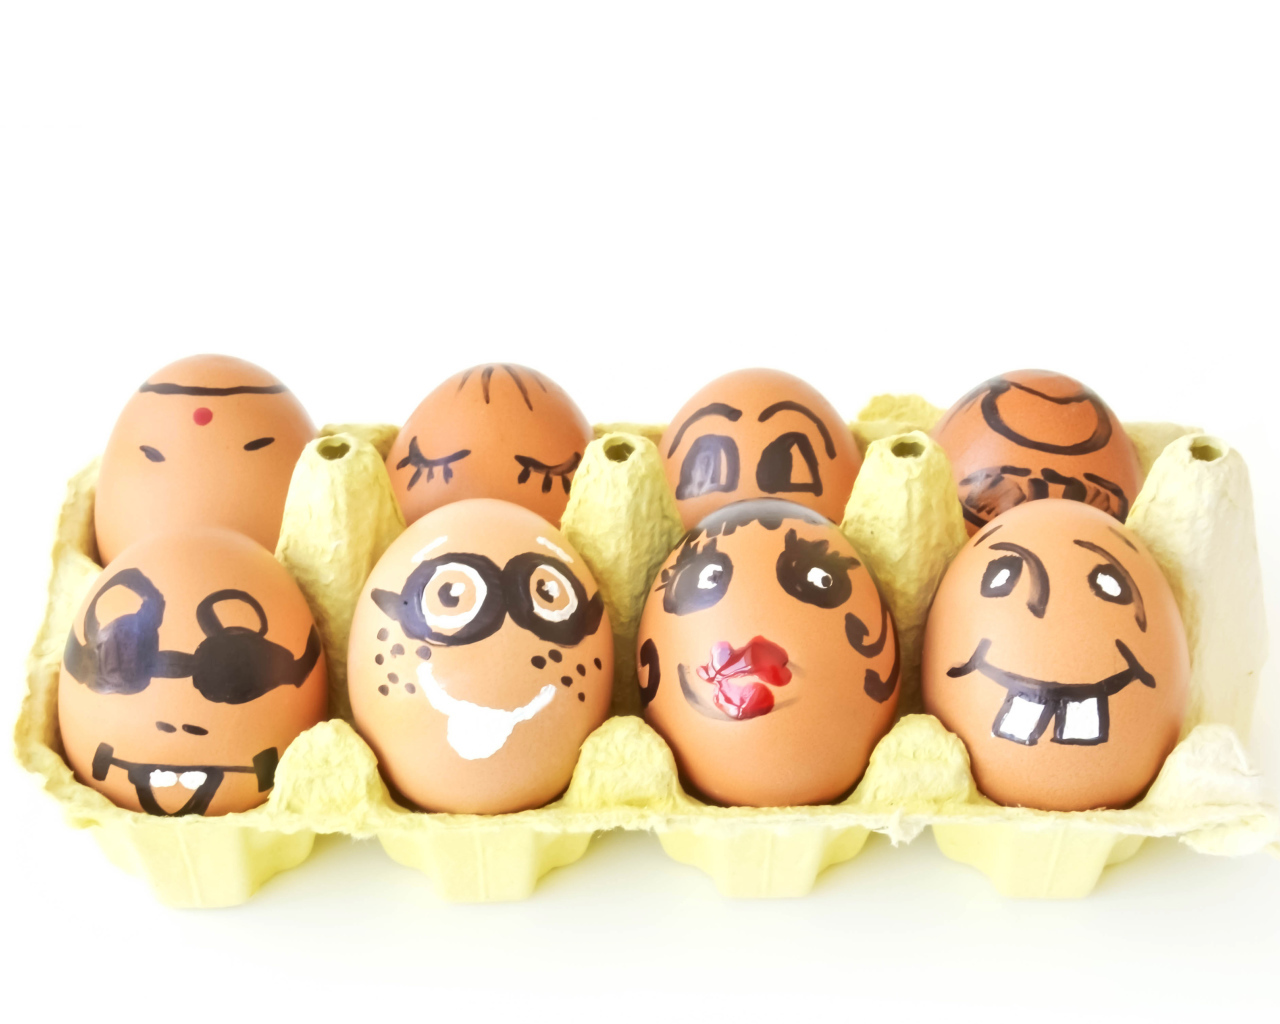 A dozen eggs with drawings on a white background